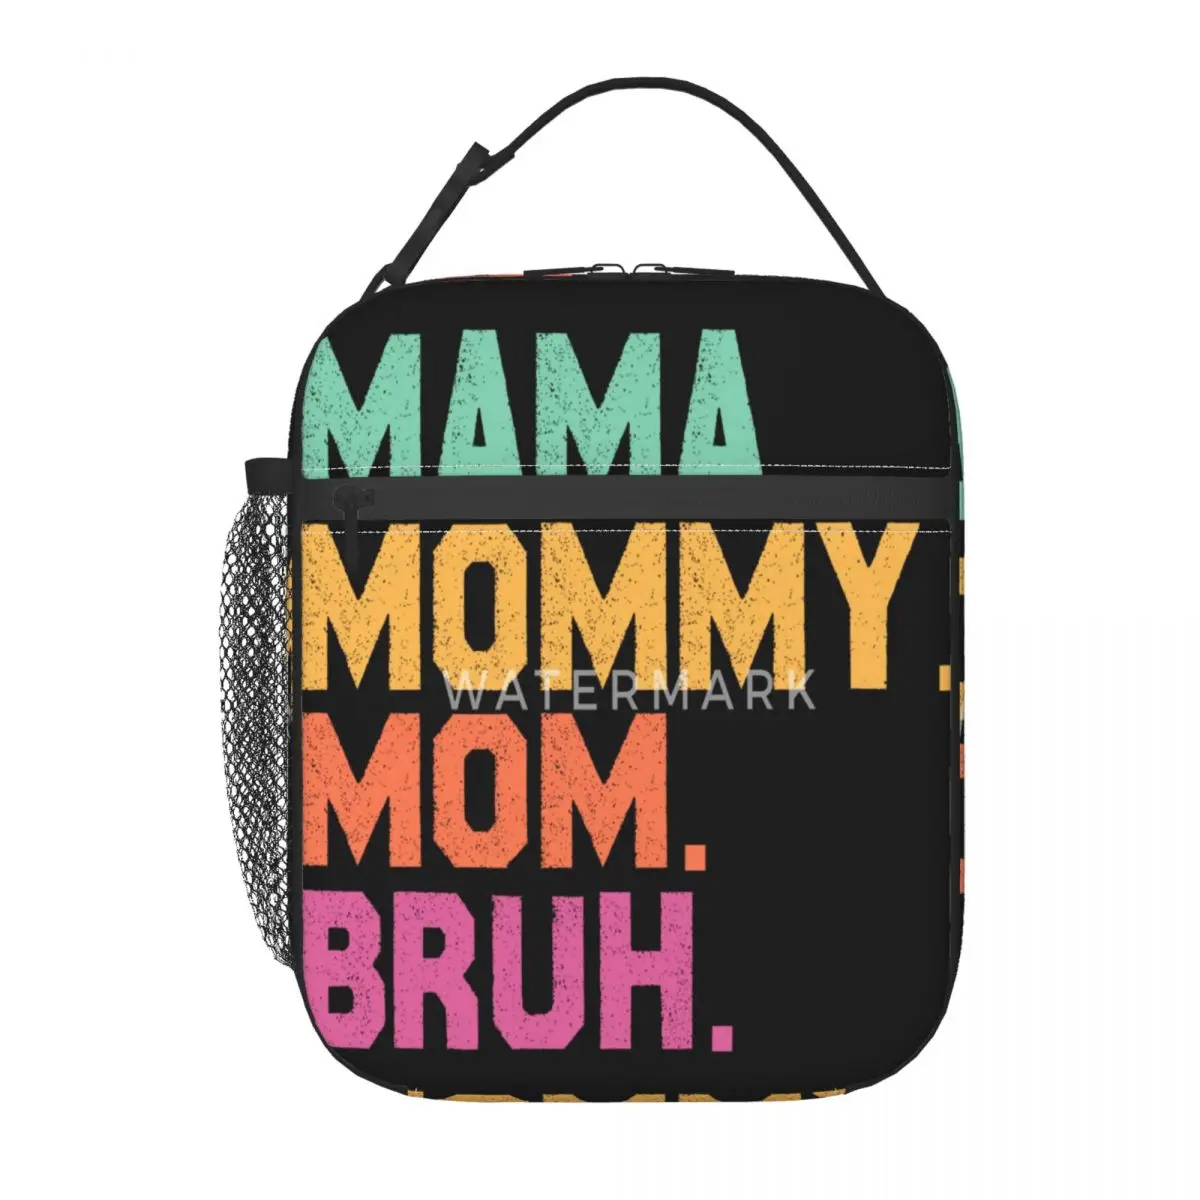 

Mama Mommy Mom Bruh Mother's Day Vintage Insulated Lunch Bag Popular Portable Gift Insulated Lunch Bag Customizable